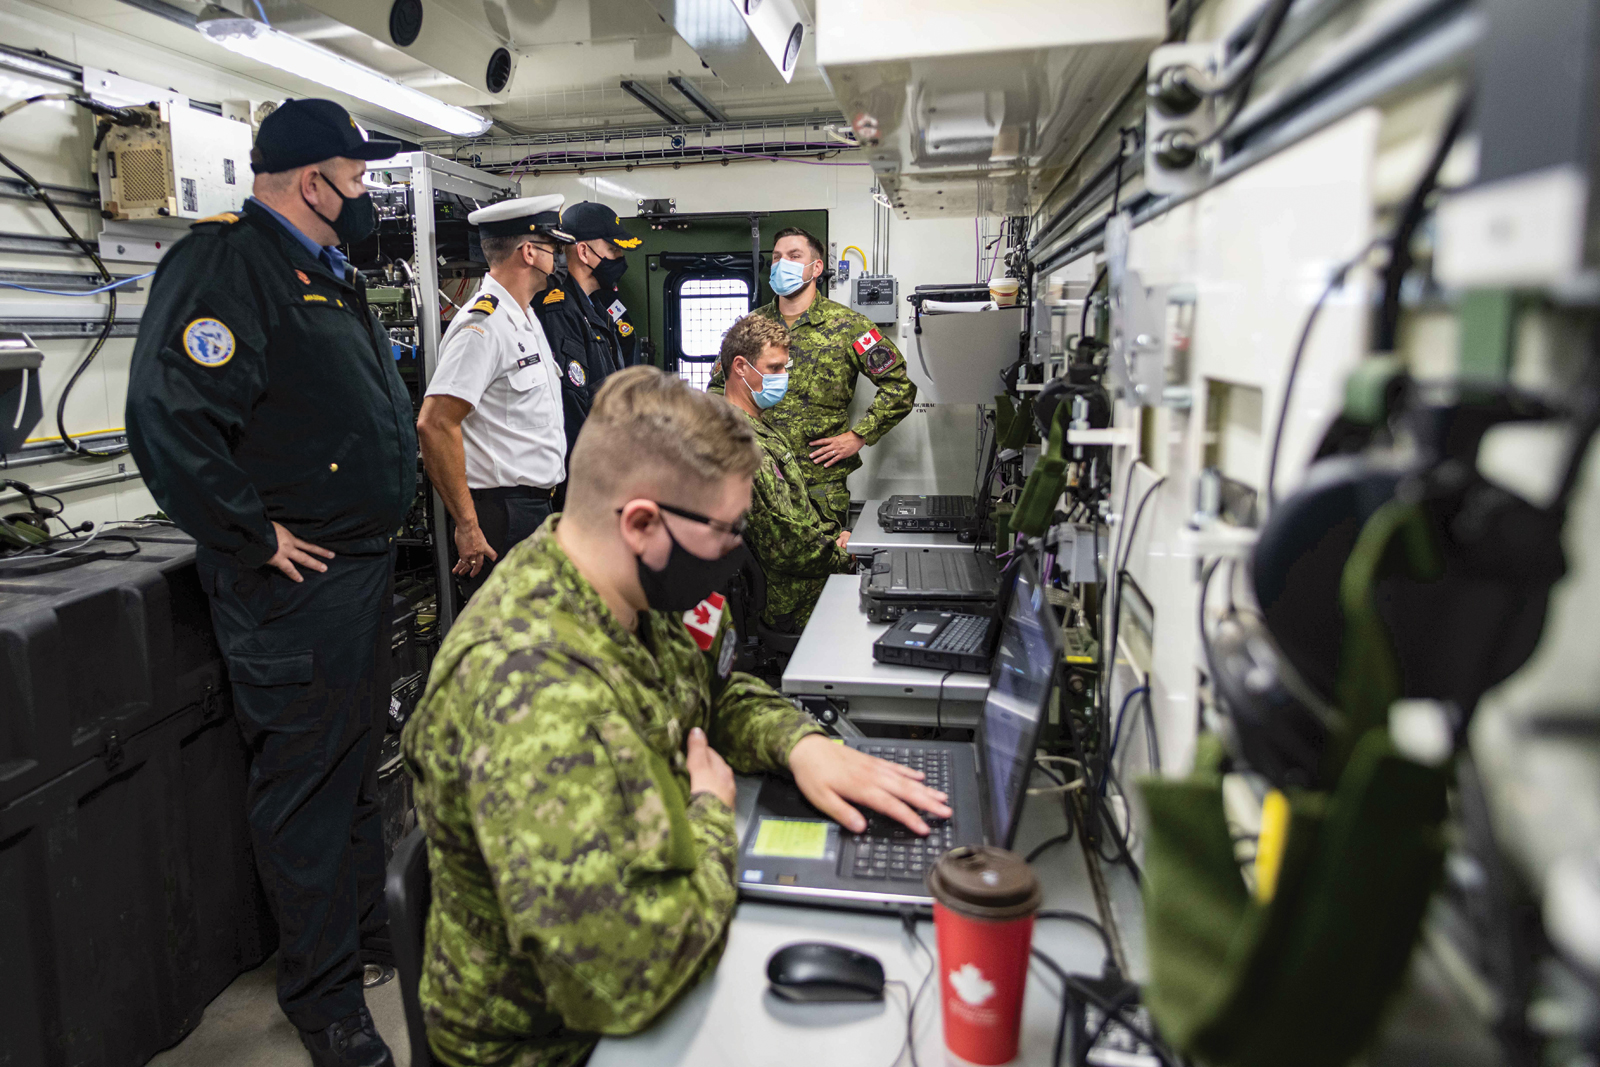 Joint Interface Control Officer candidates and staff at the Joint Interface Control Cell for Ex CUTLASS FURY 21, Osbourne Head, NS. Photo by Cpl Branden Trudeau